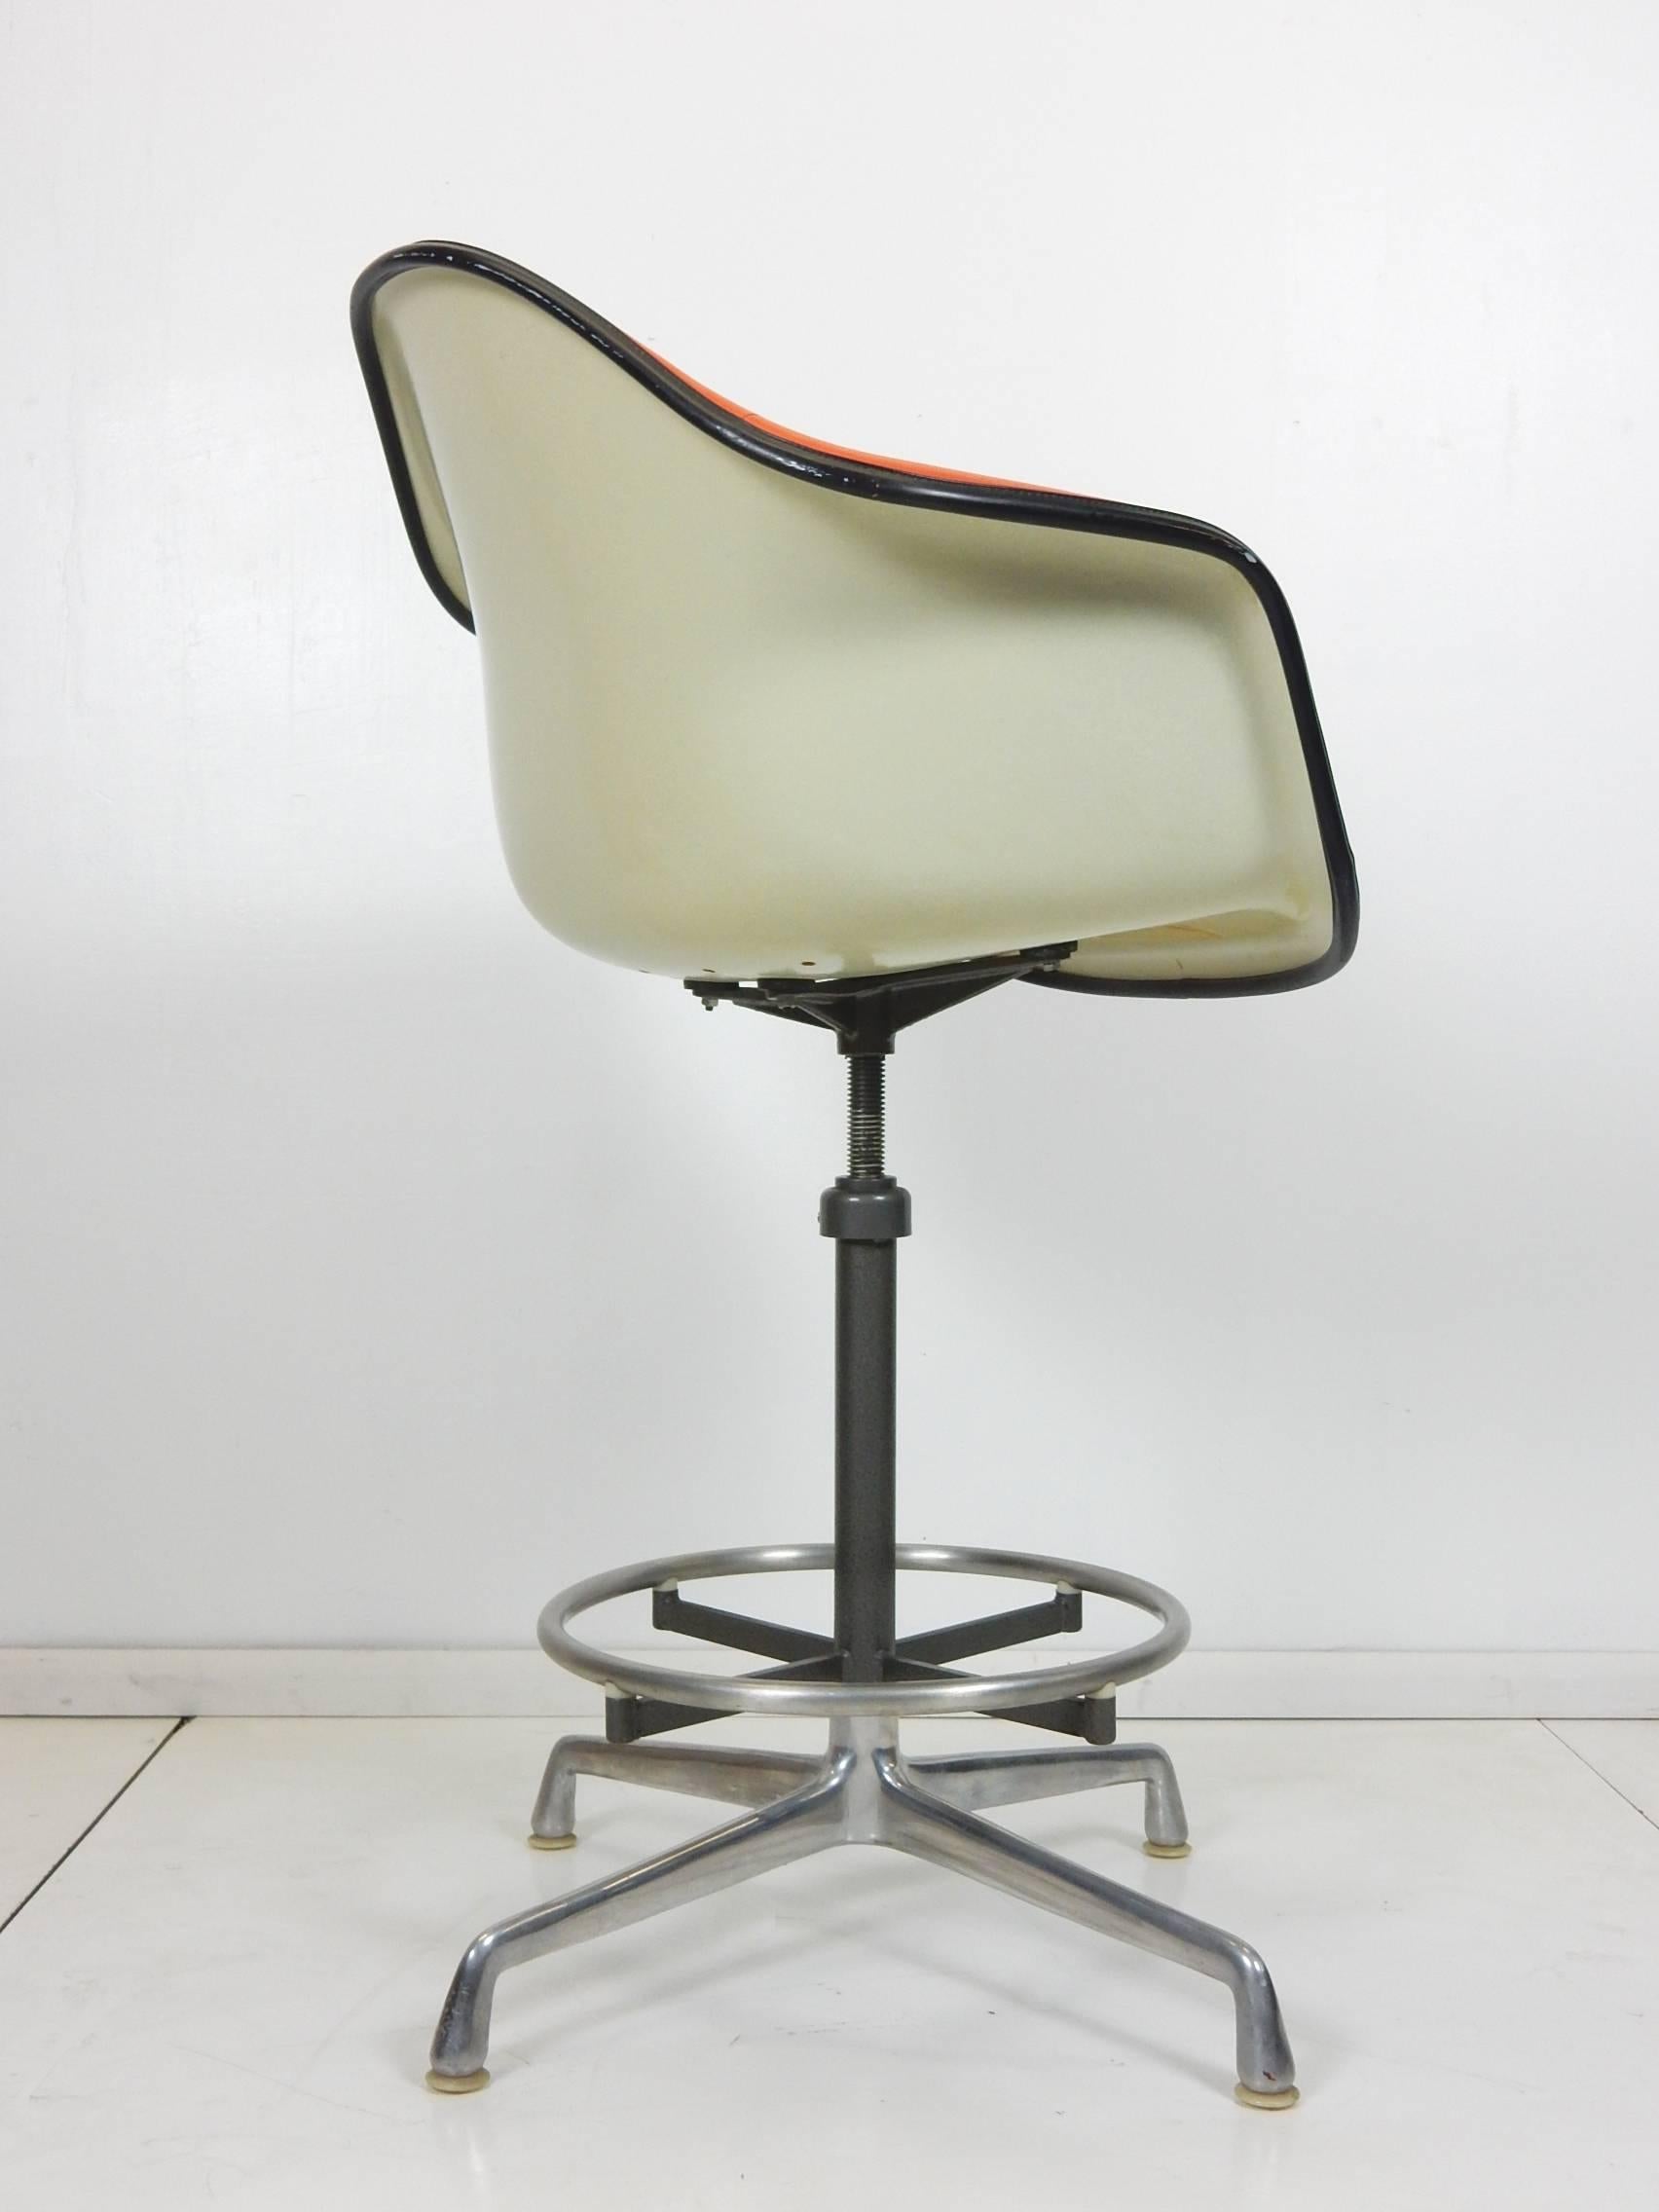 Perfect for home office, this completely original model EC 118 drafting chair designed by Charles Eames for Herman Miller.
Orange upholstered fiberglass arm shell that swivels on an aluminum base.
Labelled on the underside and dated Feb 18,